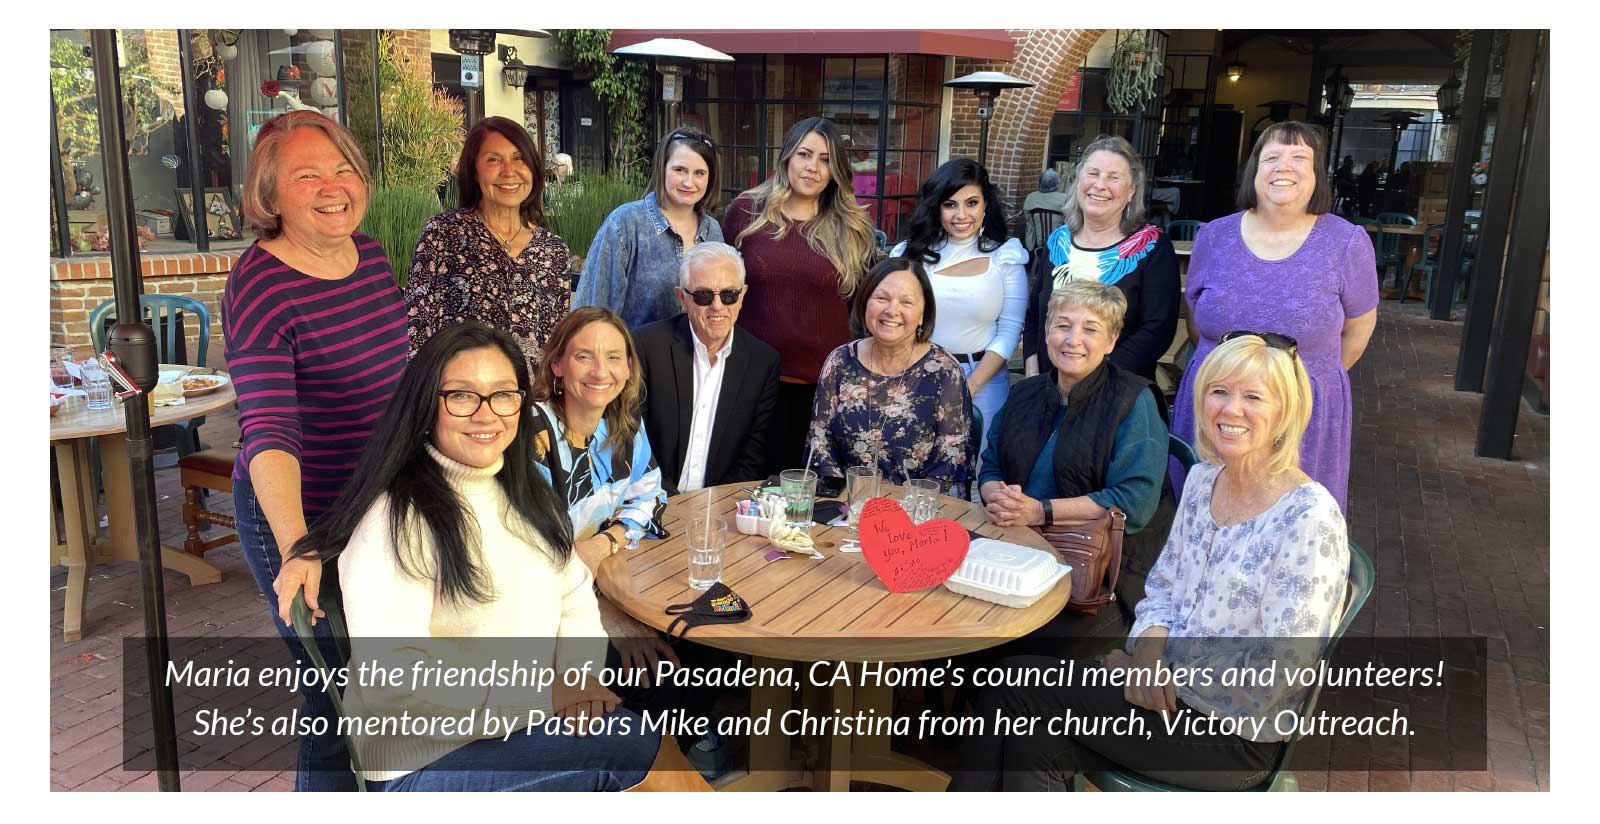 Maria enjoys the friendship of our Pasadena, CA Home's council members and volunteers!